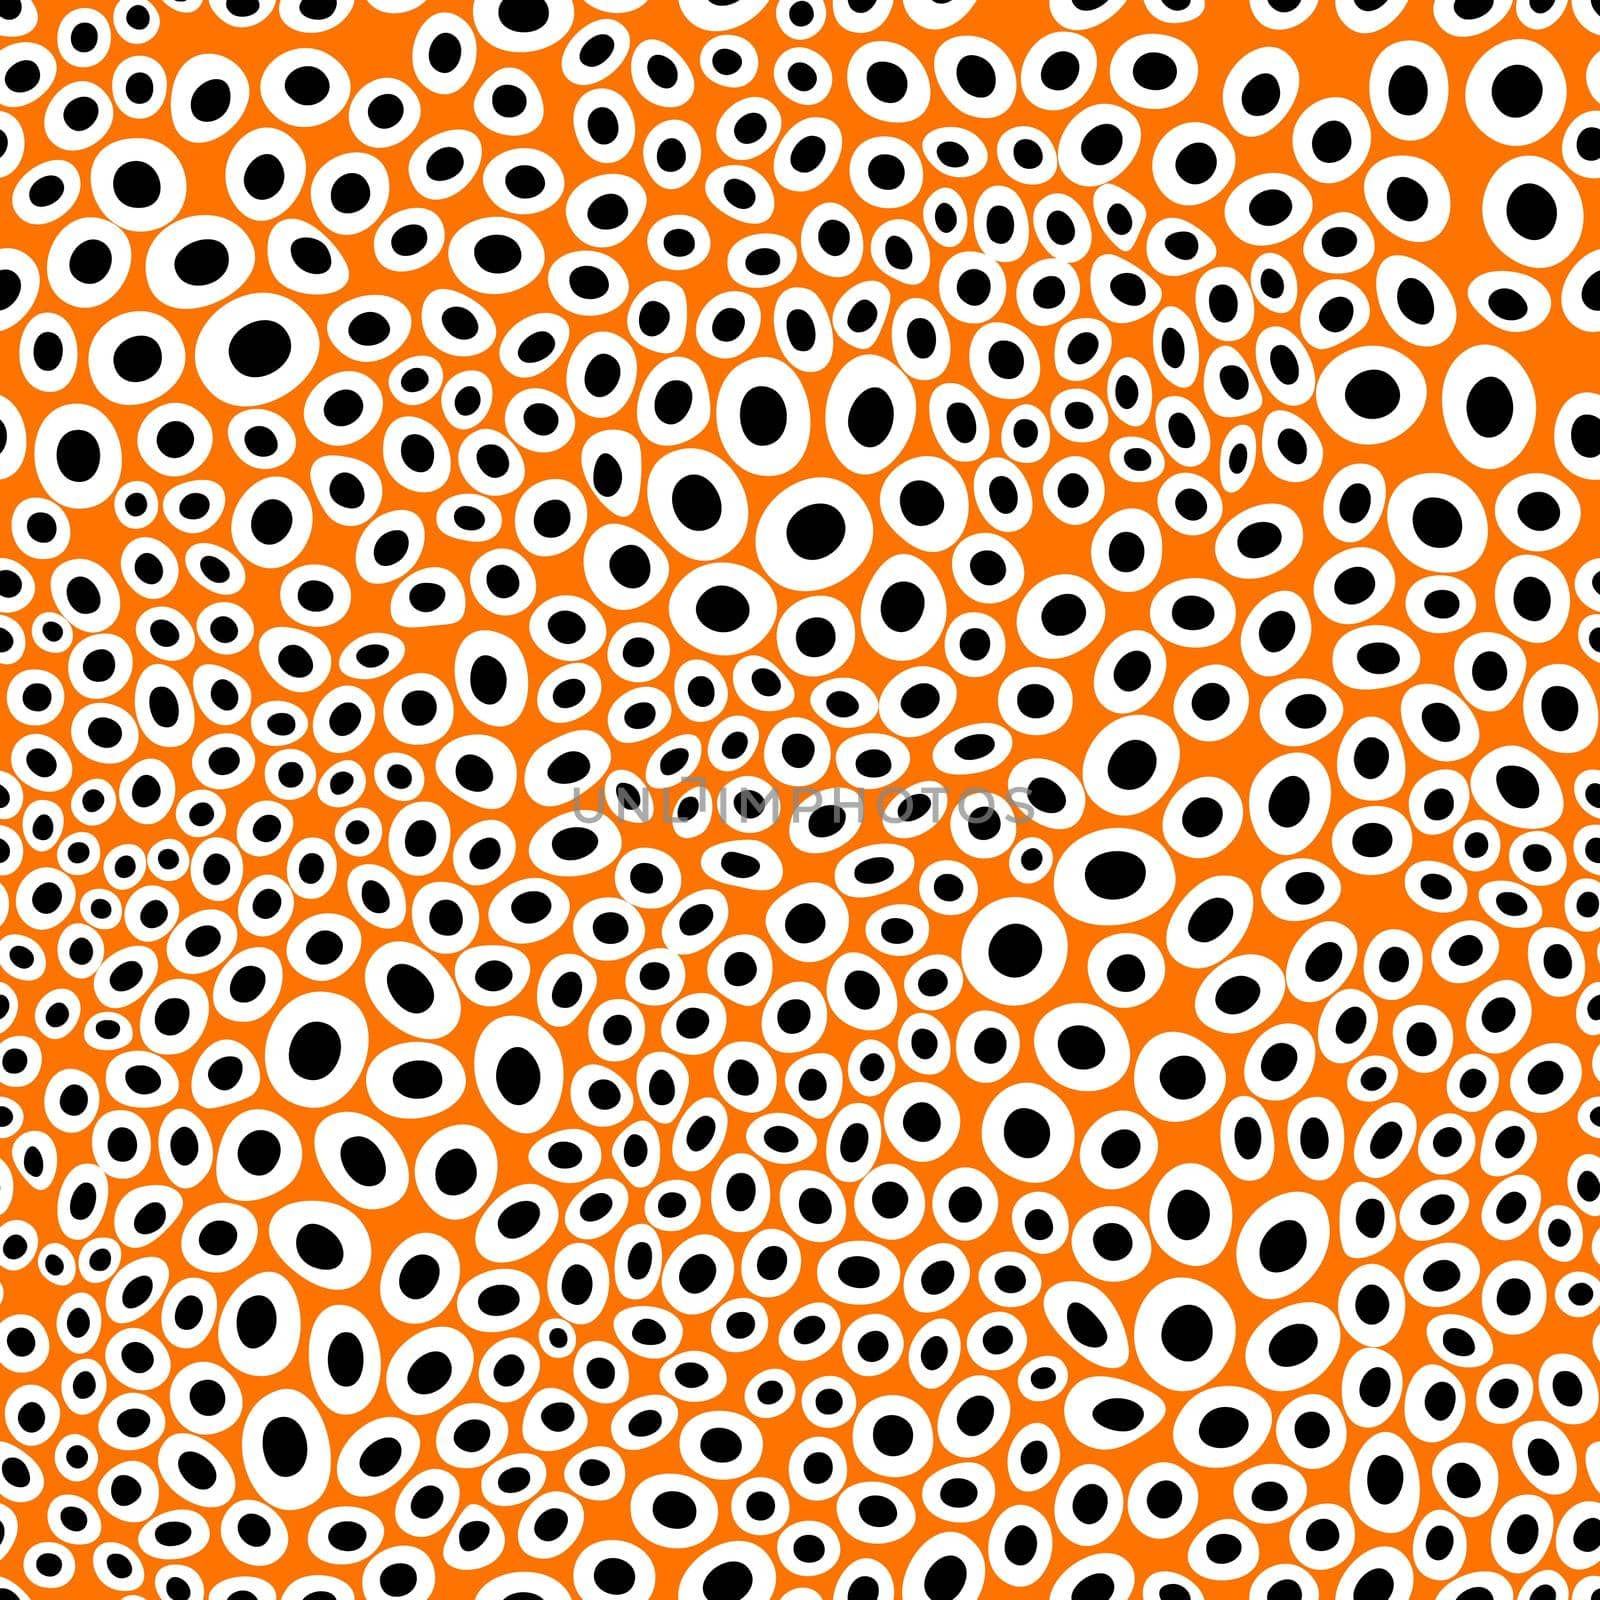 New modern animal seamless pattern. Black and white ornament on orange background. Decorative vector stock illustration for posters, card, postcard, fabric, textile. Ornament of stylized skin